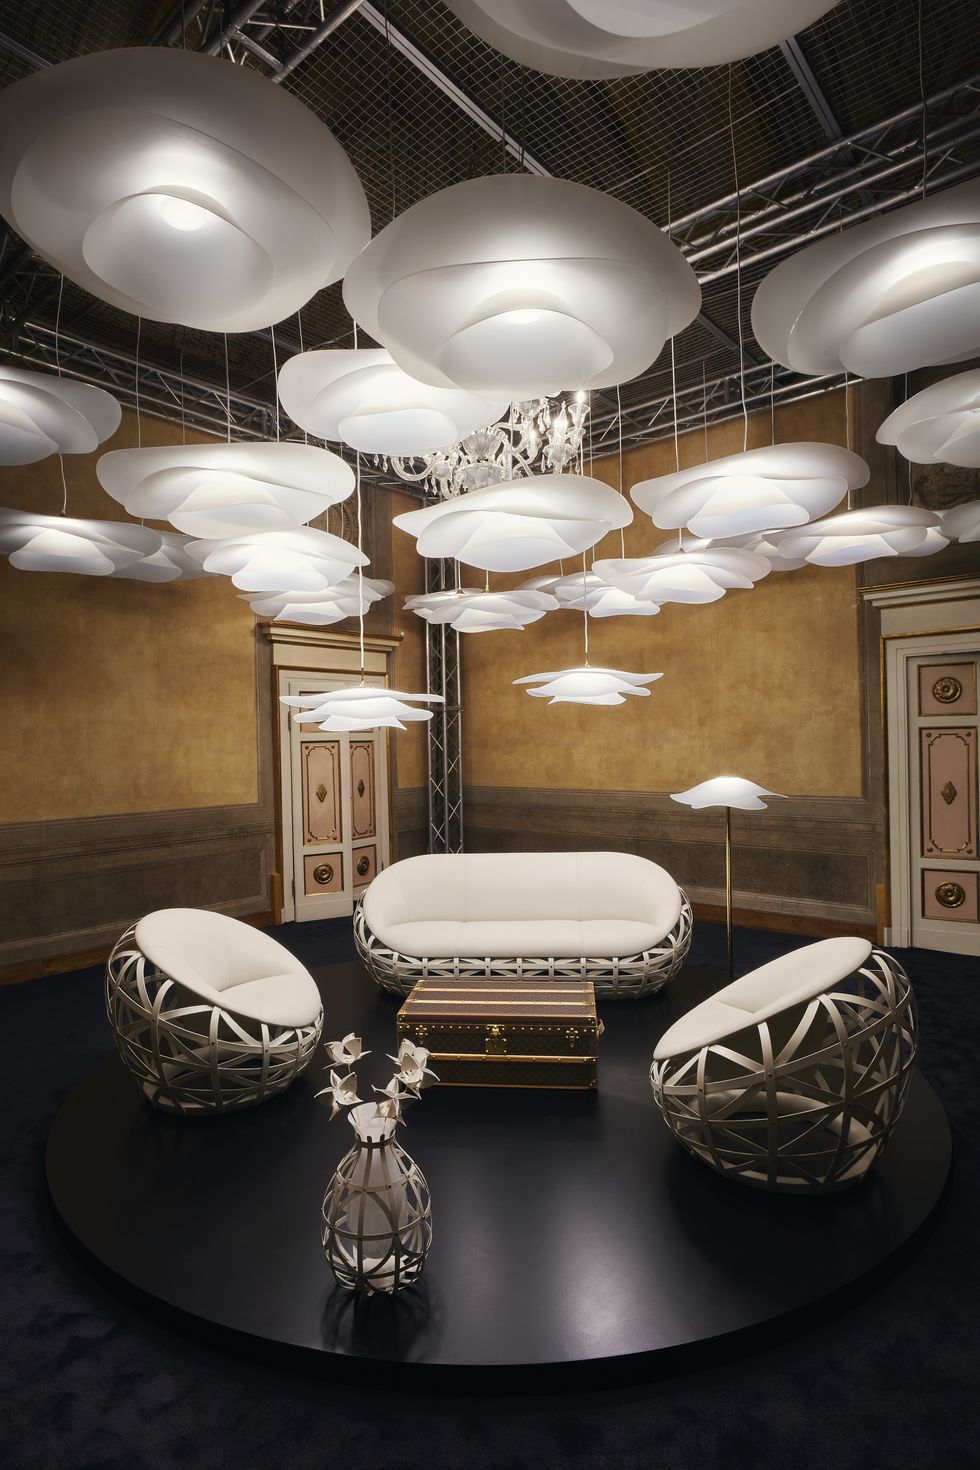 Scenes from Salone del Mobile 2023: The Fairest of Them All